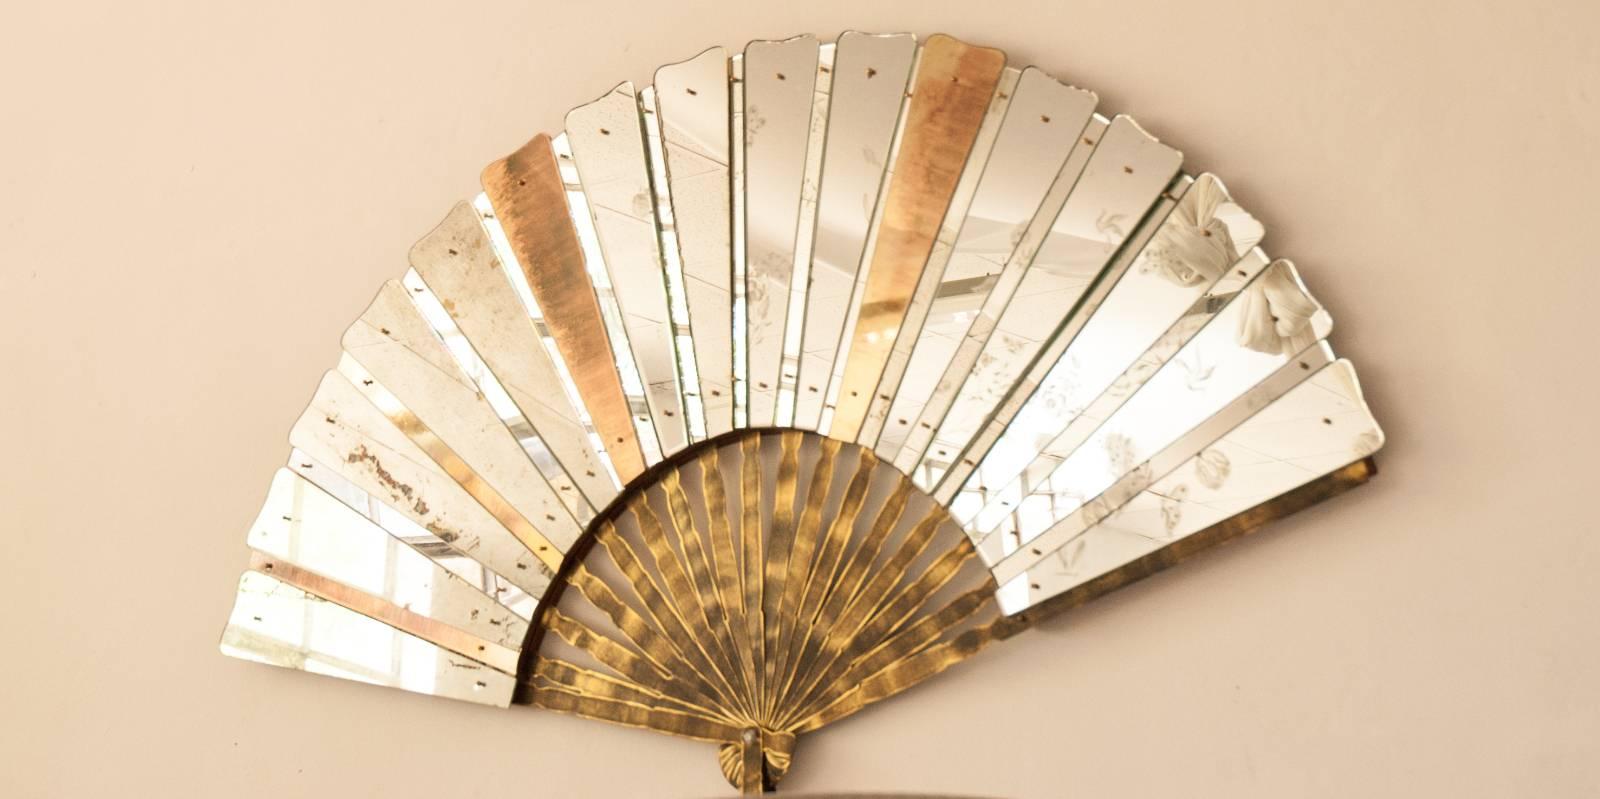 Fan mirror realized with silvered and old glass with reflections of flowers and butterflies slices of kimono silk knobs and handle made of bronzed brass. Measurements 190 x 105 x 6 cm. This one piece is now available.